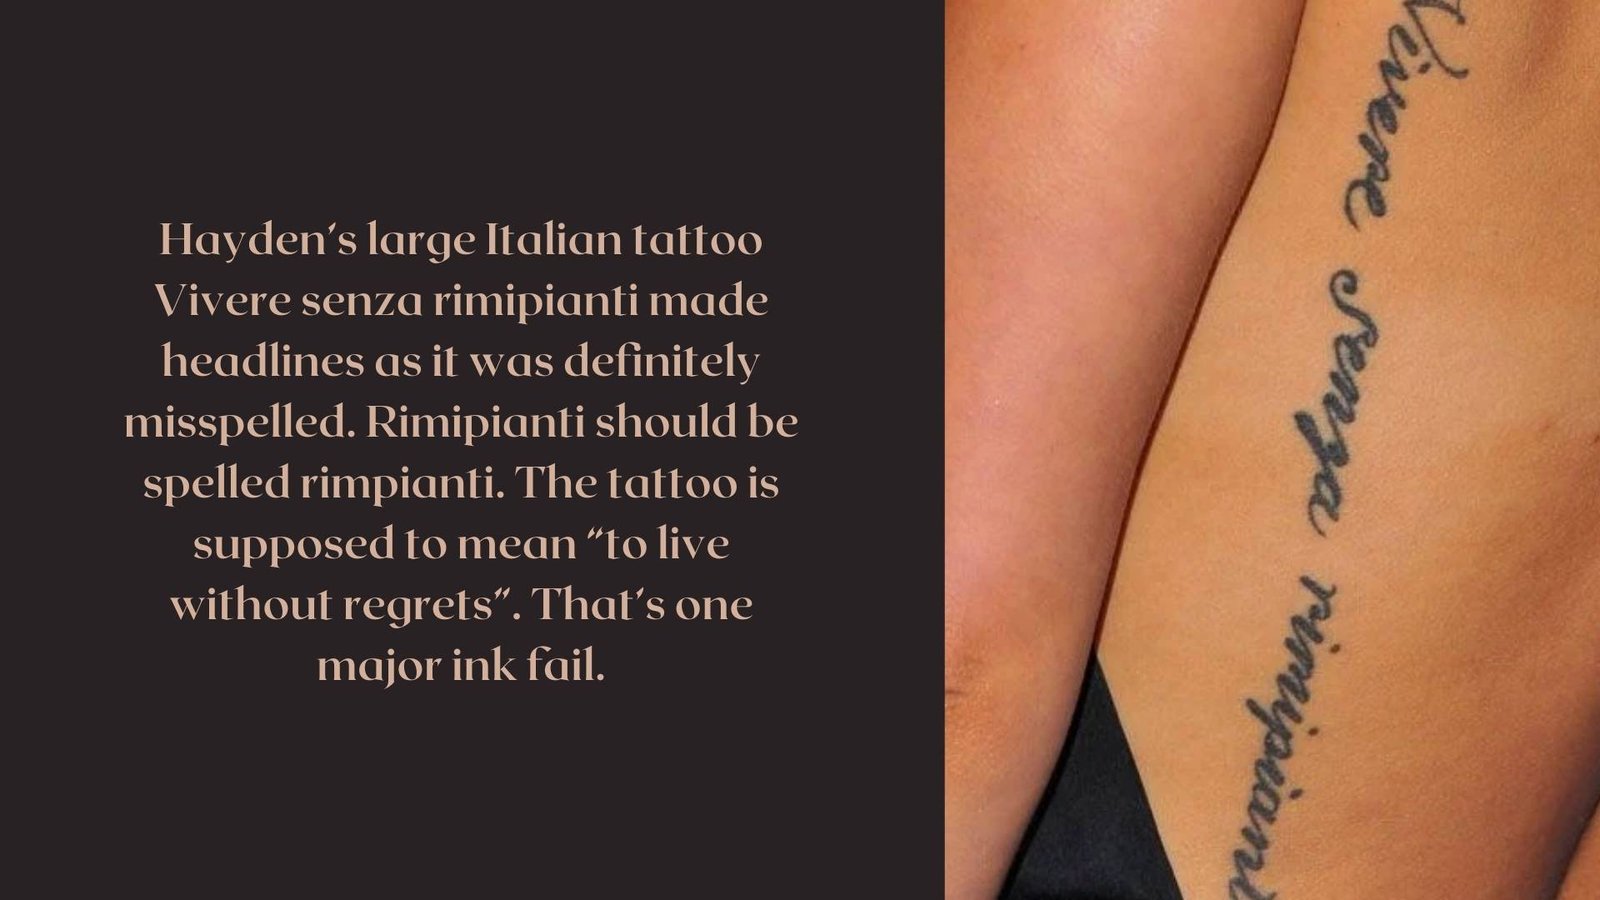 Hayden Panettiere’s Tattoos & Their Meanings